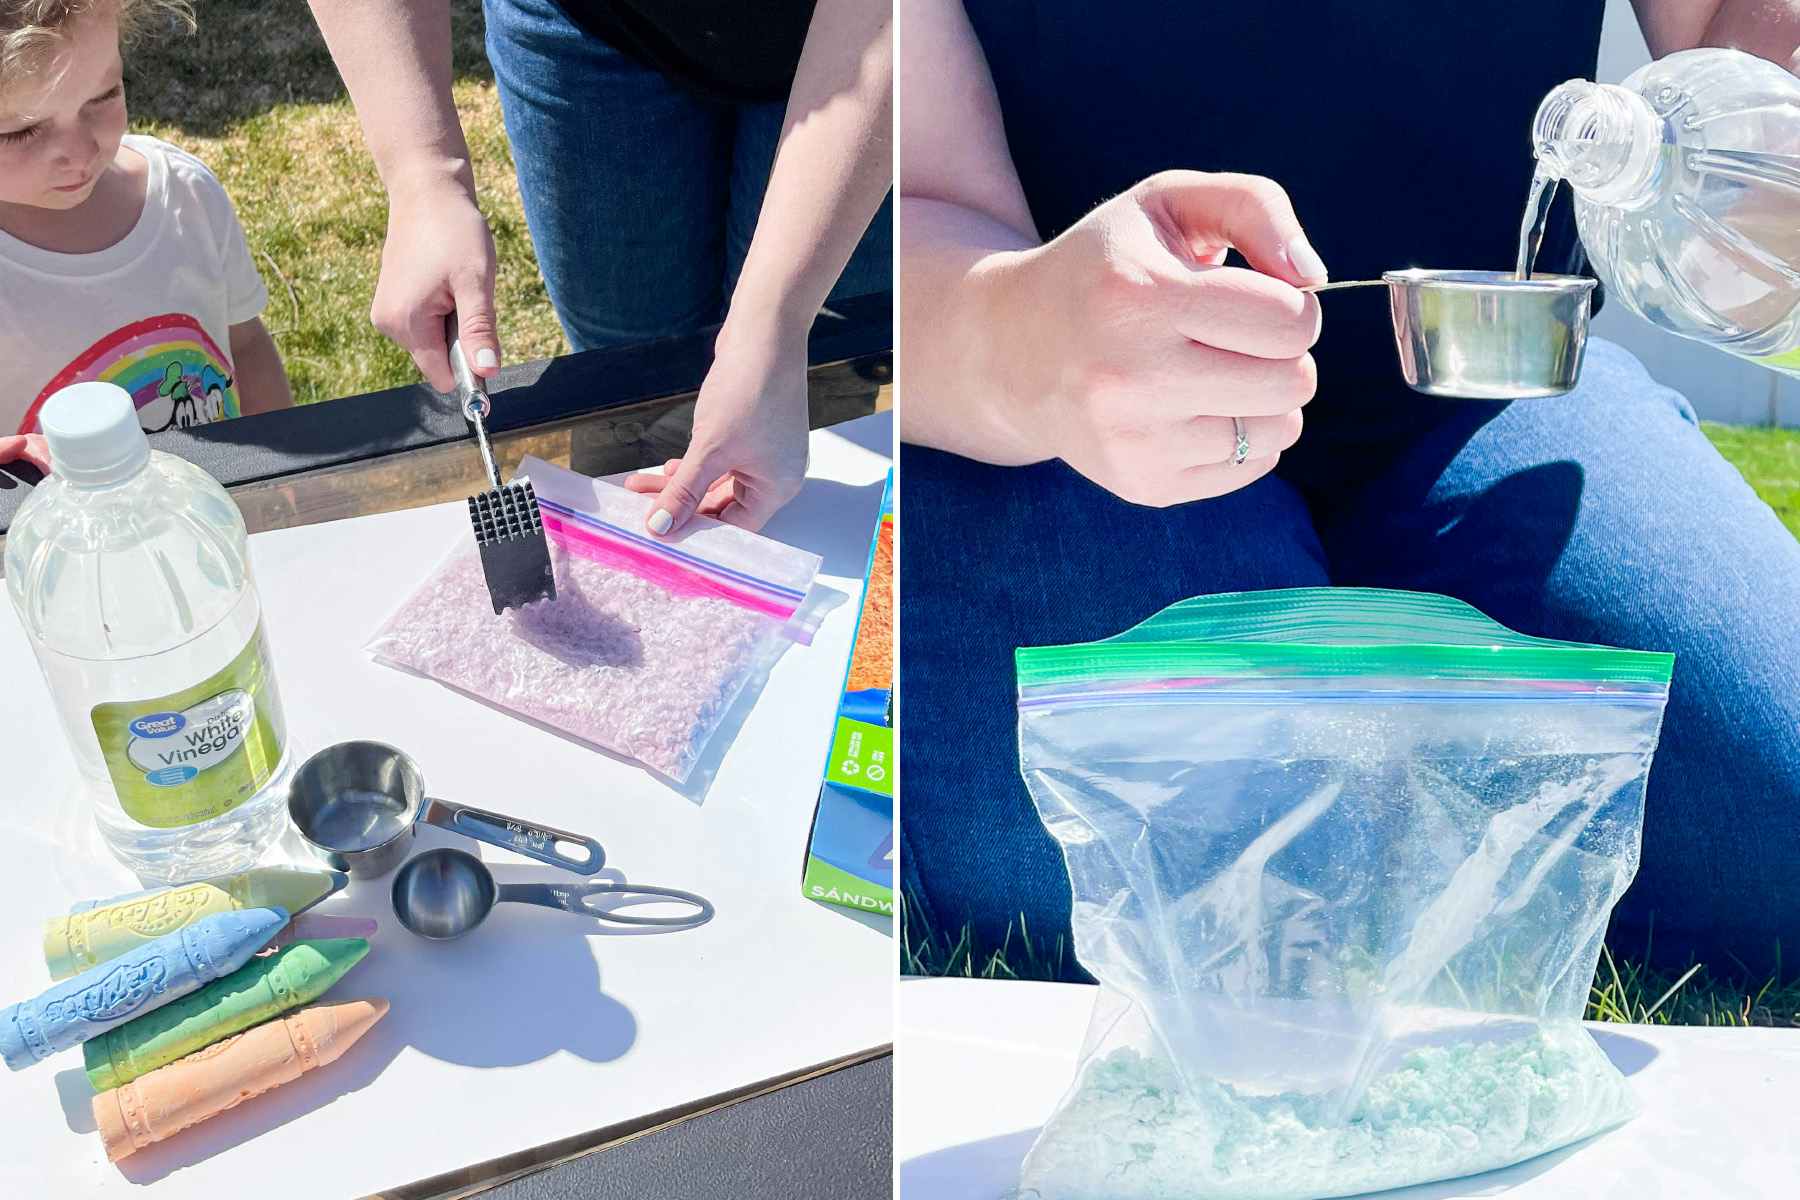 two images of a person hammering a bag of chalk and other filling a bag of crushed chalk with a cup of vingear 